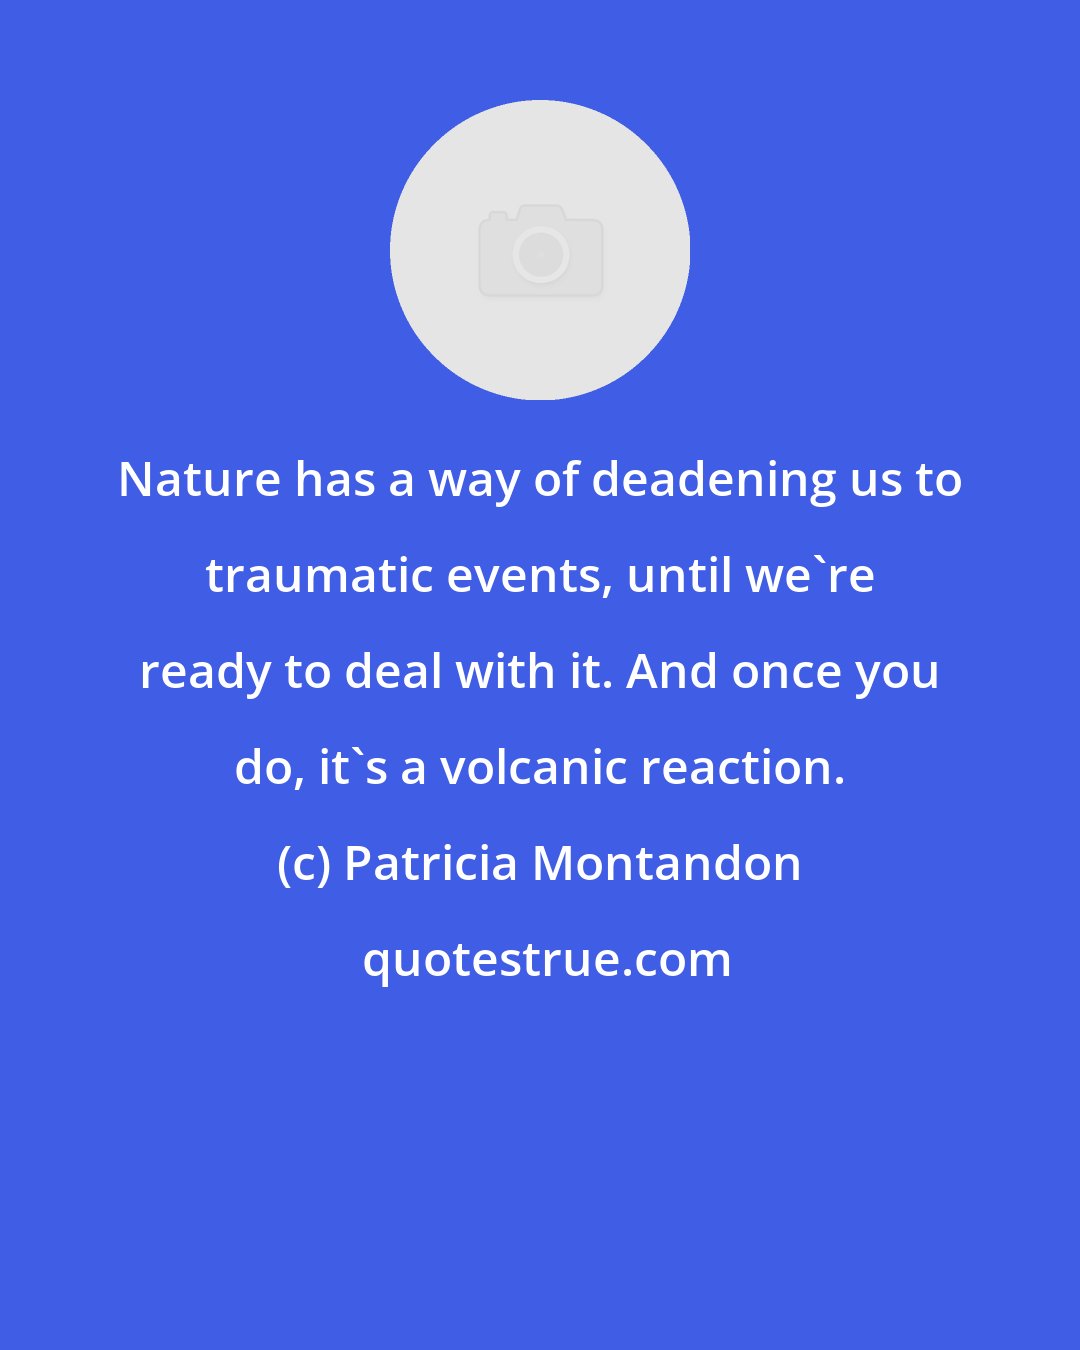 Patricia Montandon: Nature has a way of deadening us to traumatic events, until we're ready to deal with it. And once you do, it's a volcanic reaction.